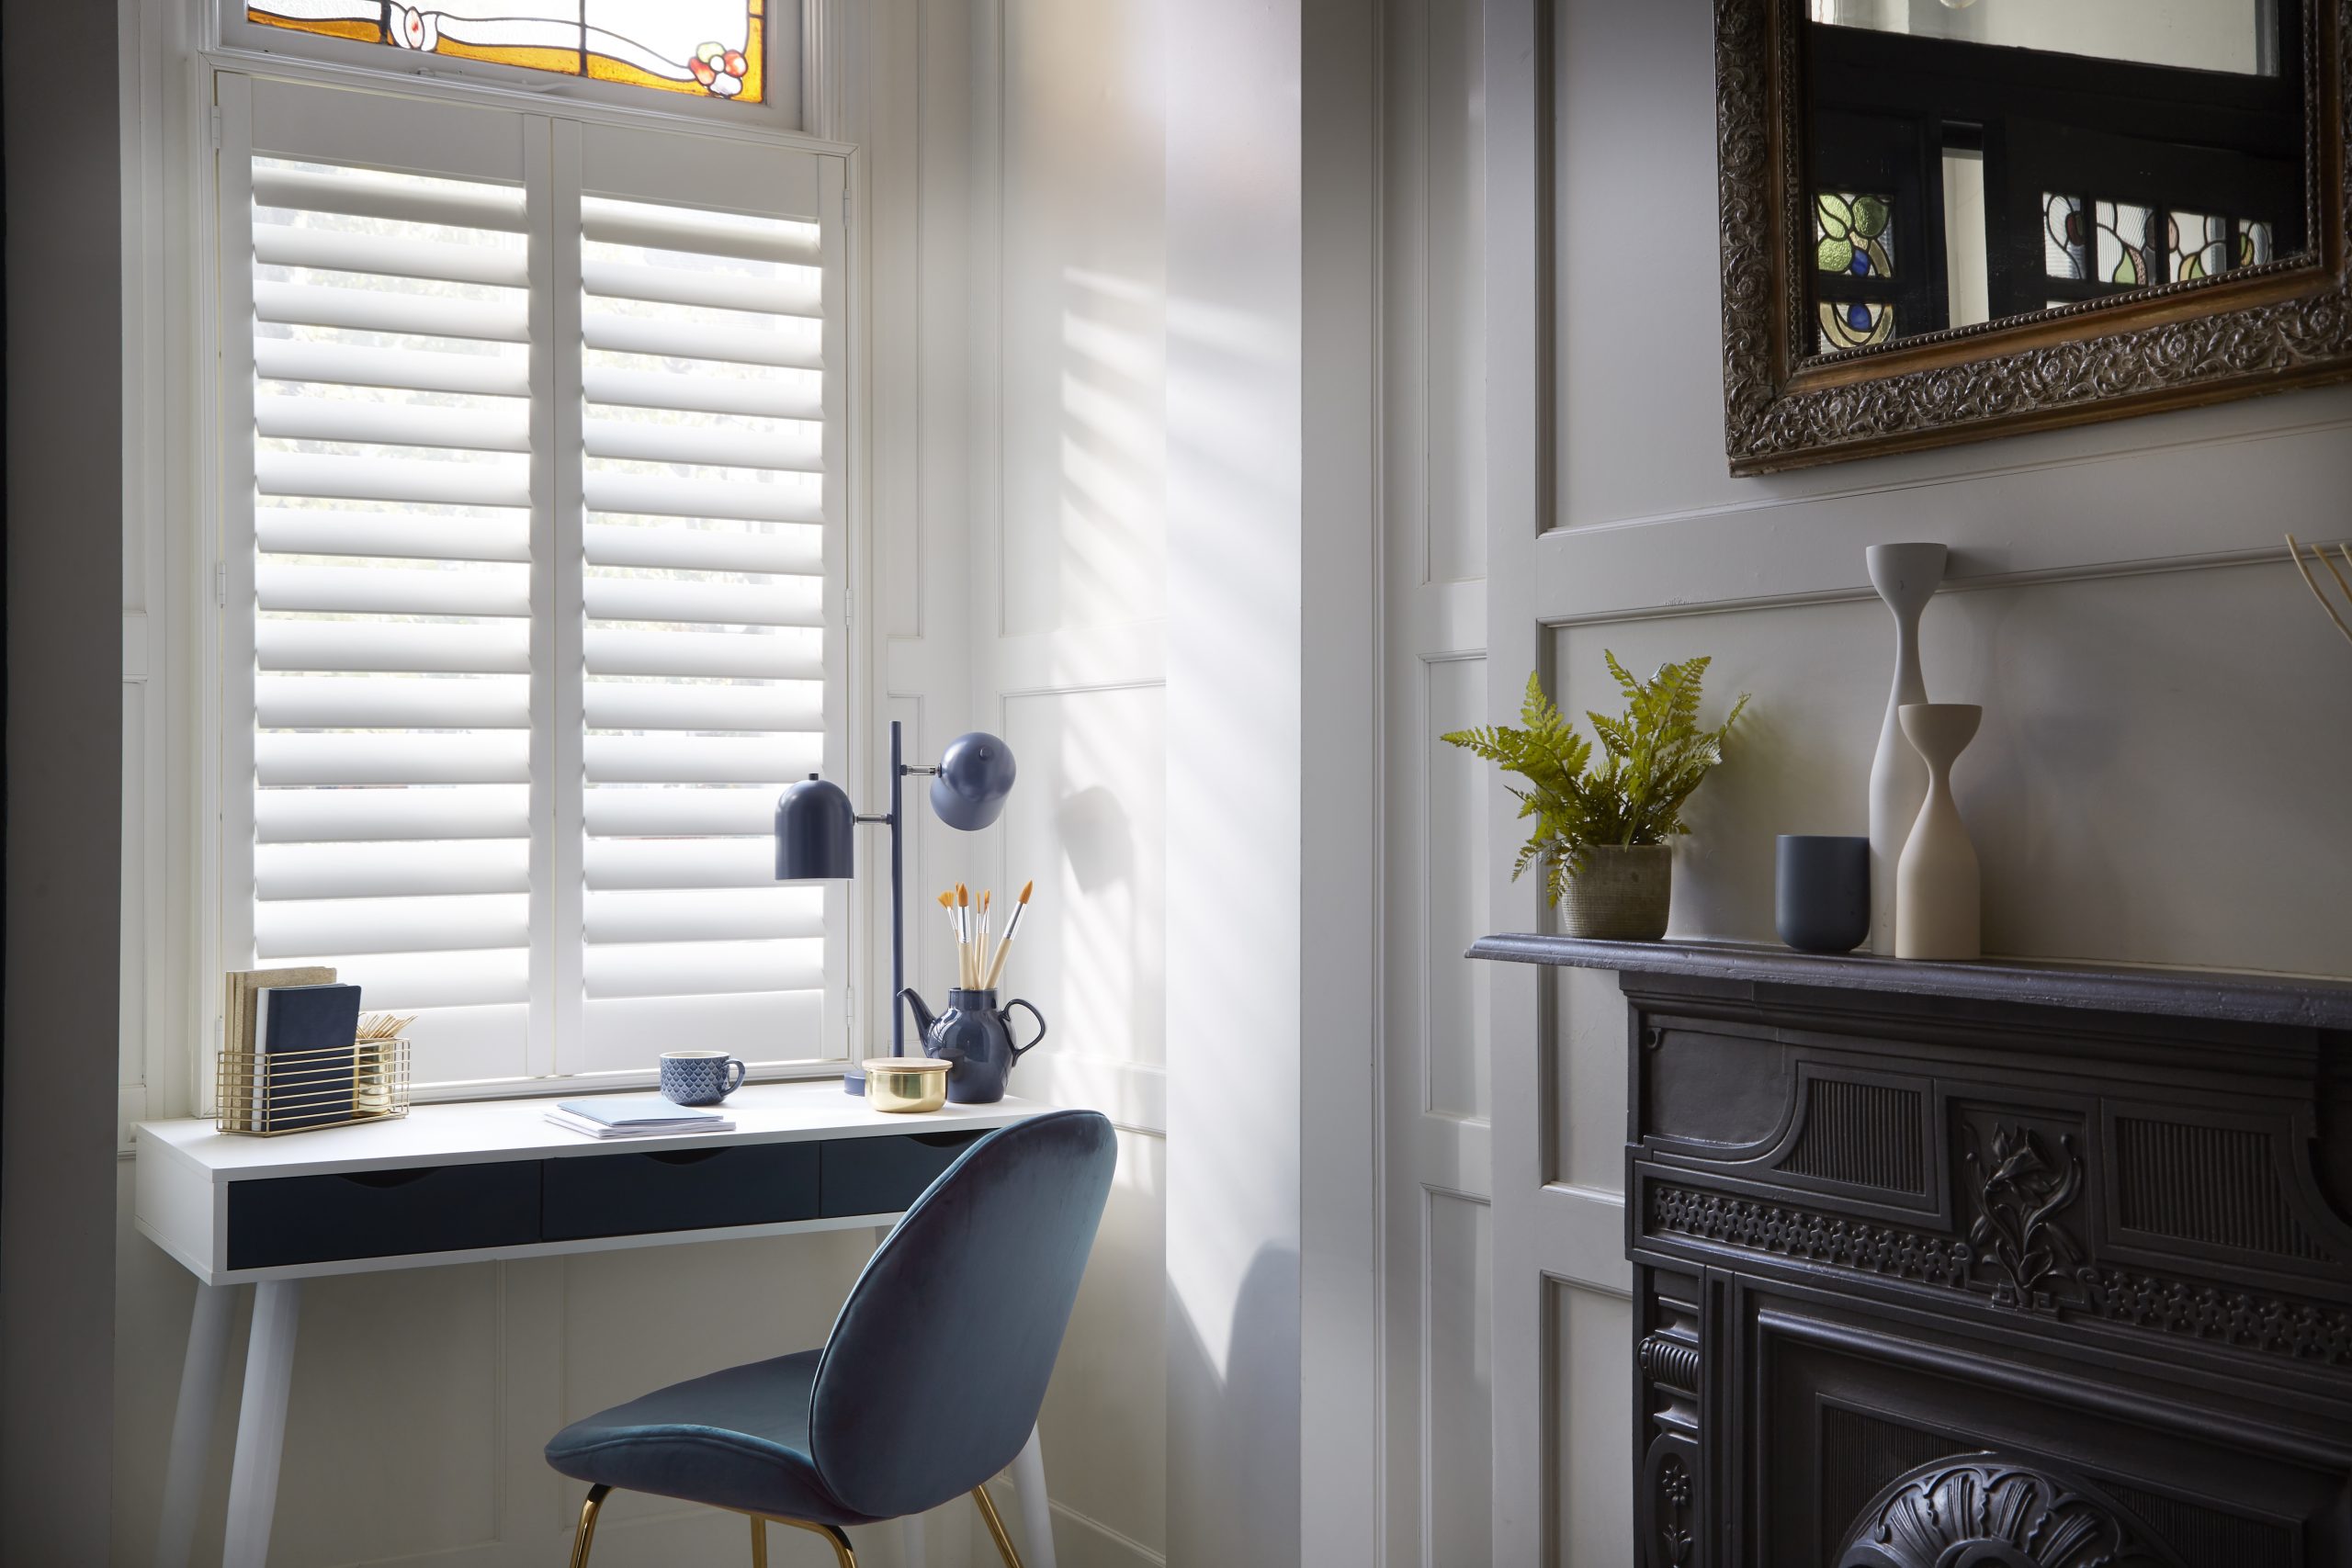 Exclusive Shutters Range at window with desk and chair, with a fireplace and mirror